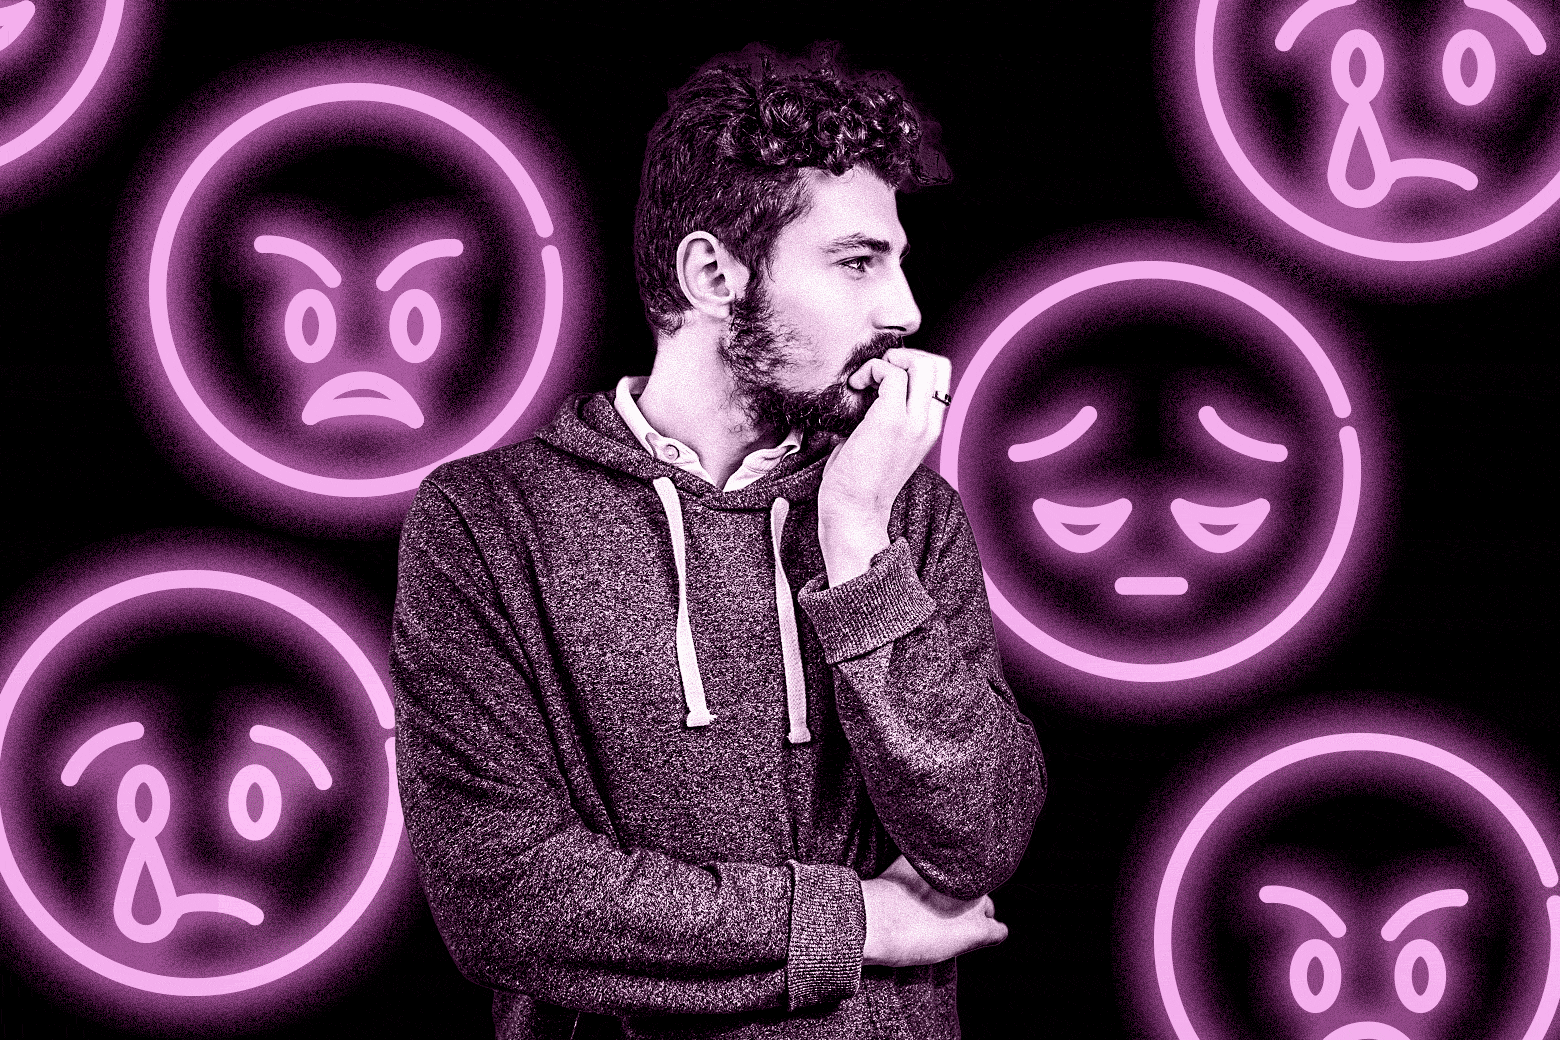 Man looking off to the side worried with a backdrop of angry and sad emojis.